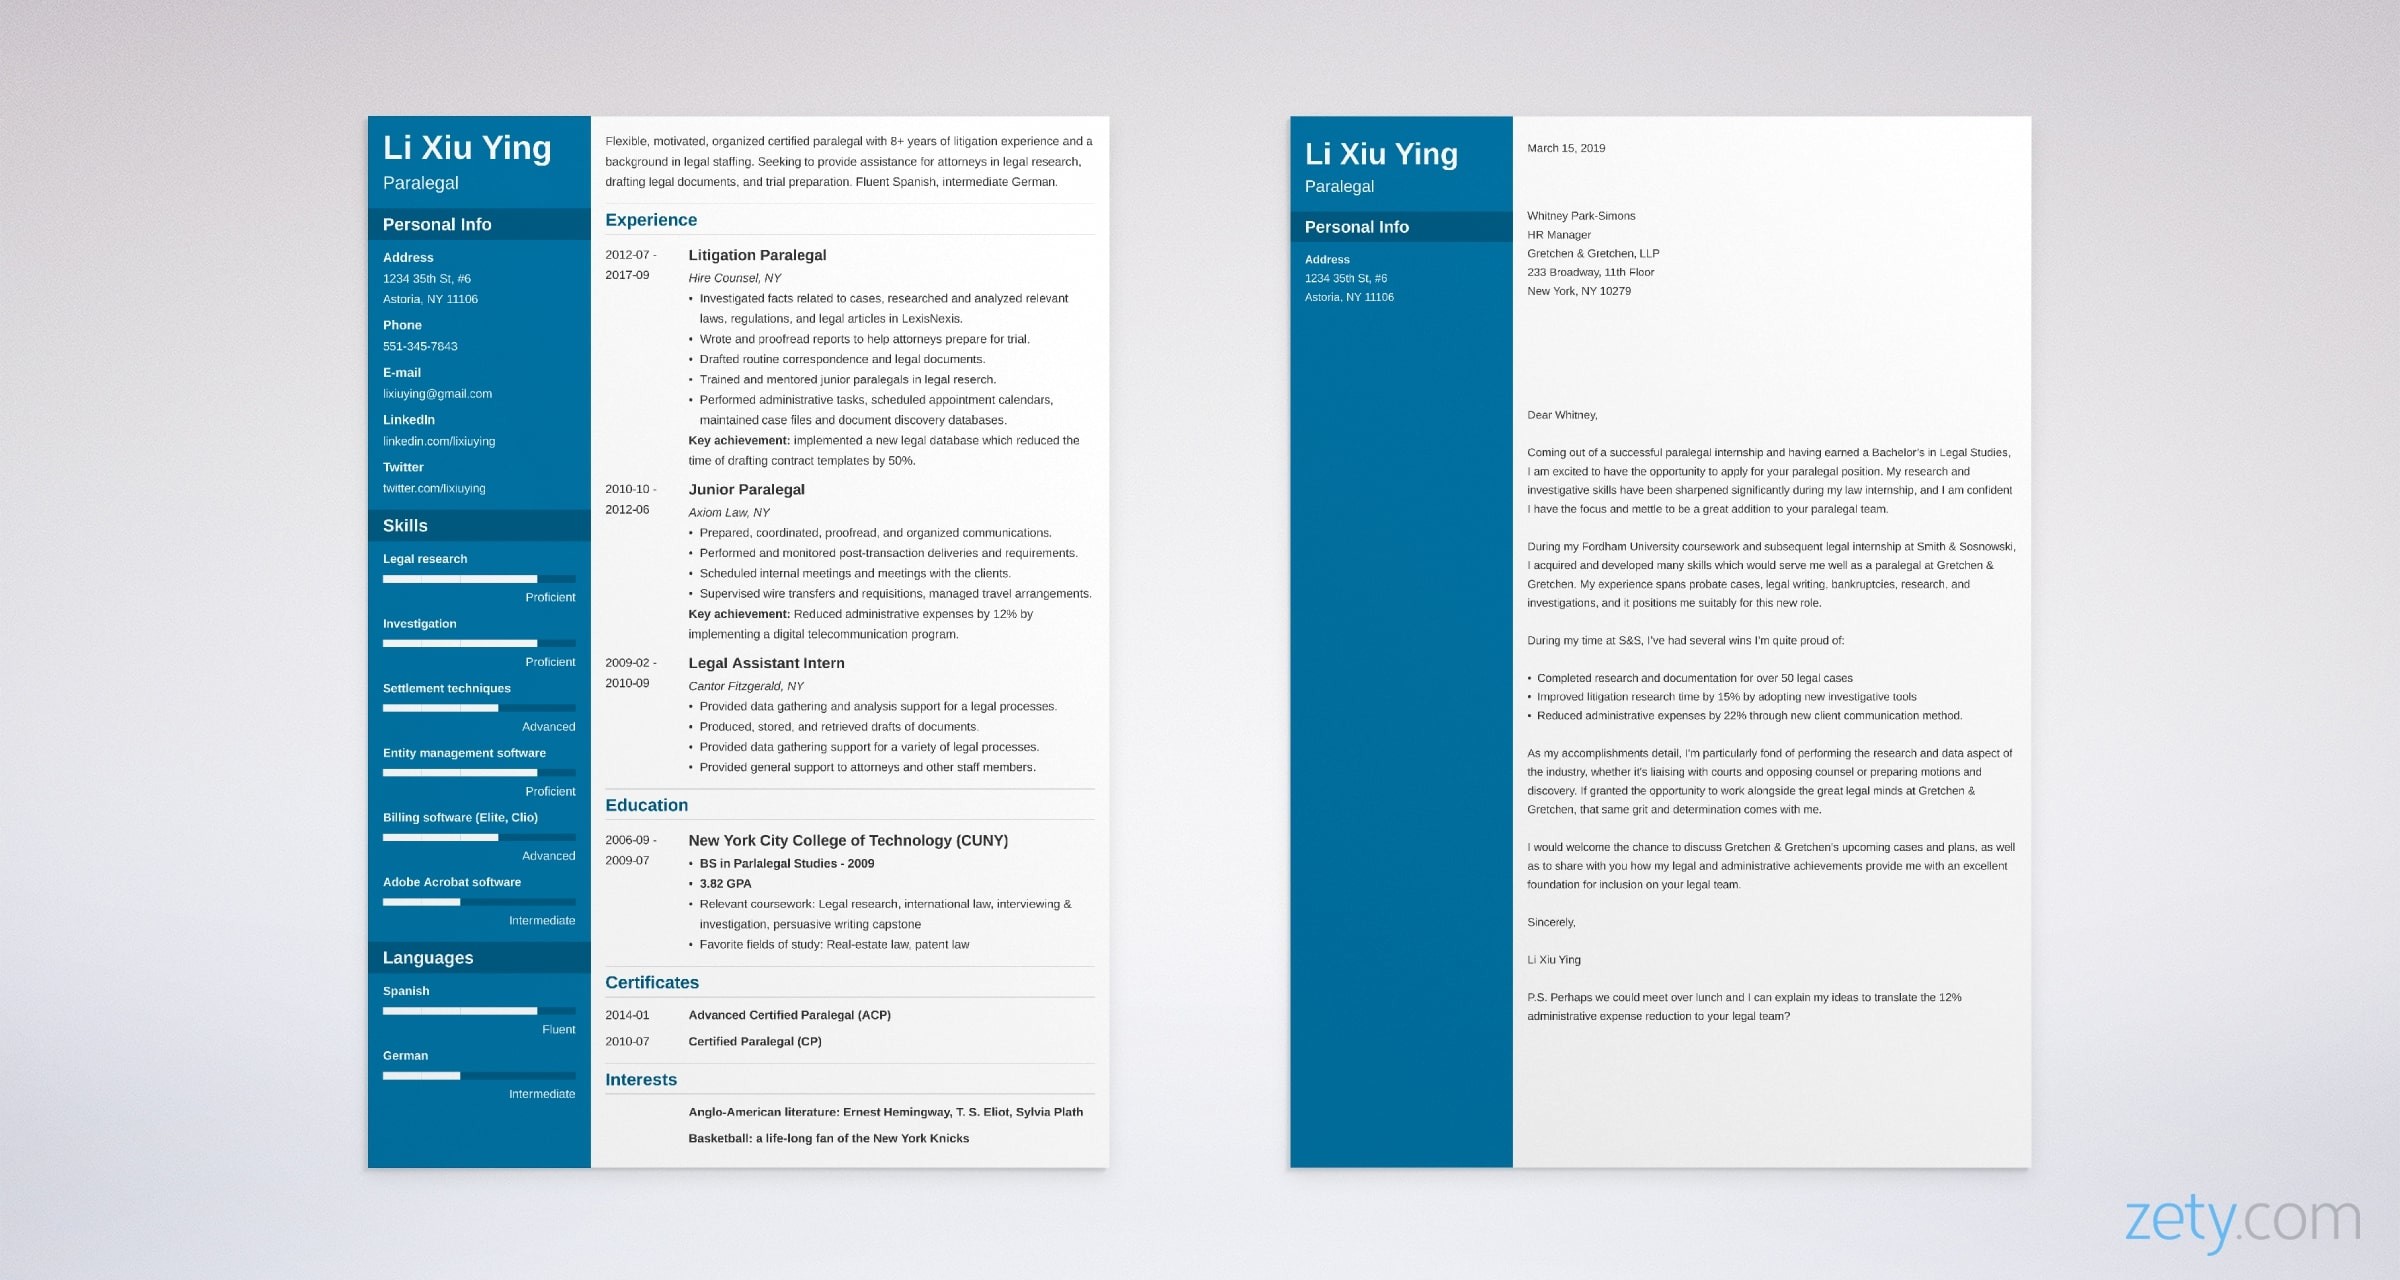 paralegal resume and cover letter set